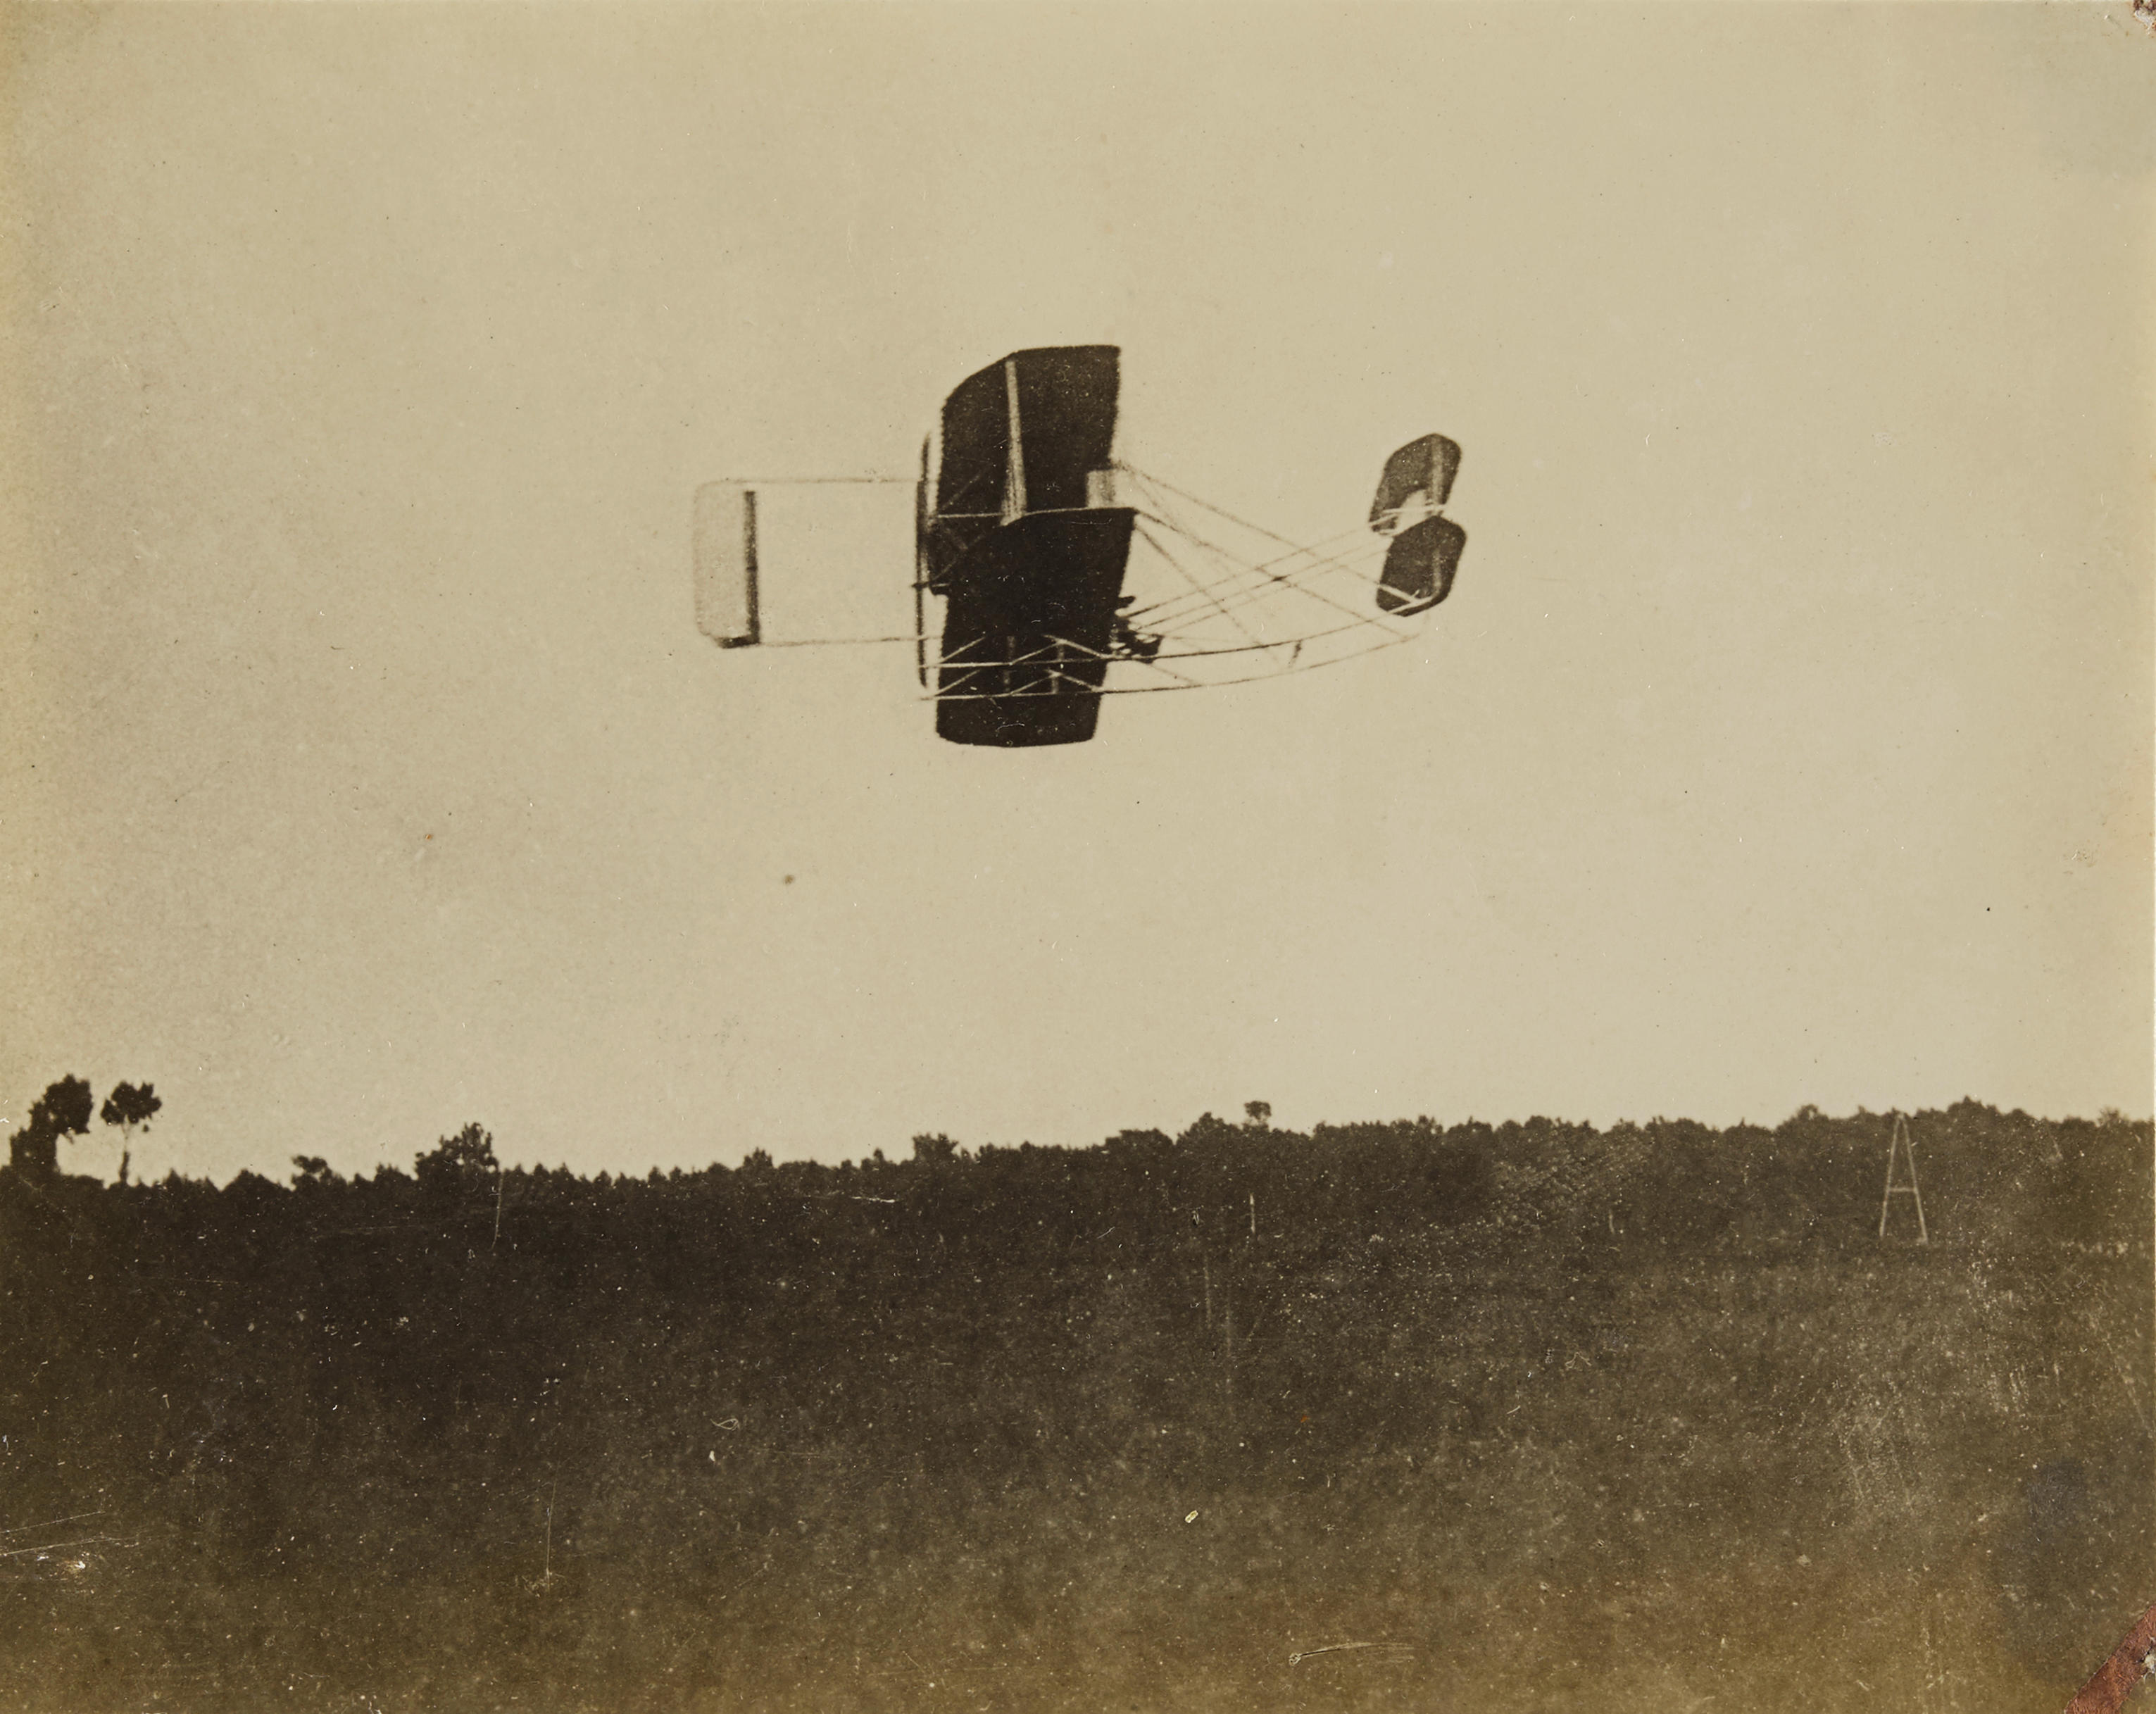 JIMMY HARE AND LÉON BOLLÉE PHOTOS OF WRIGHT BROTHERS IN FLIGHT